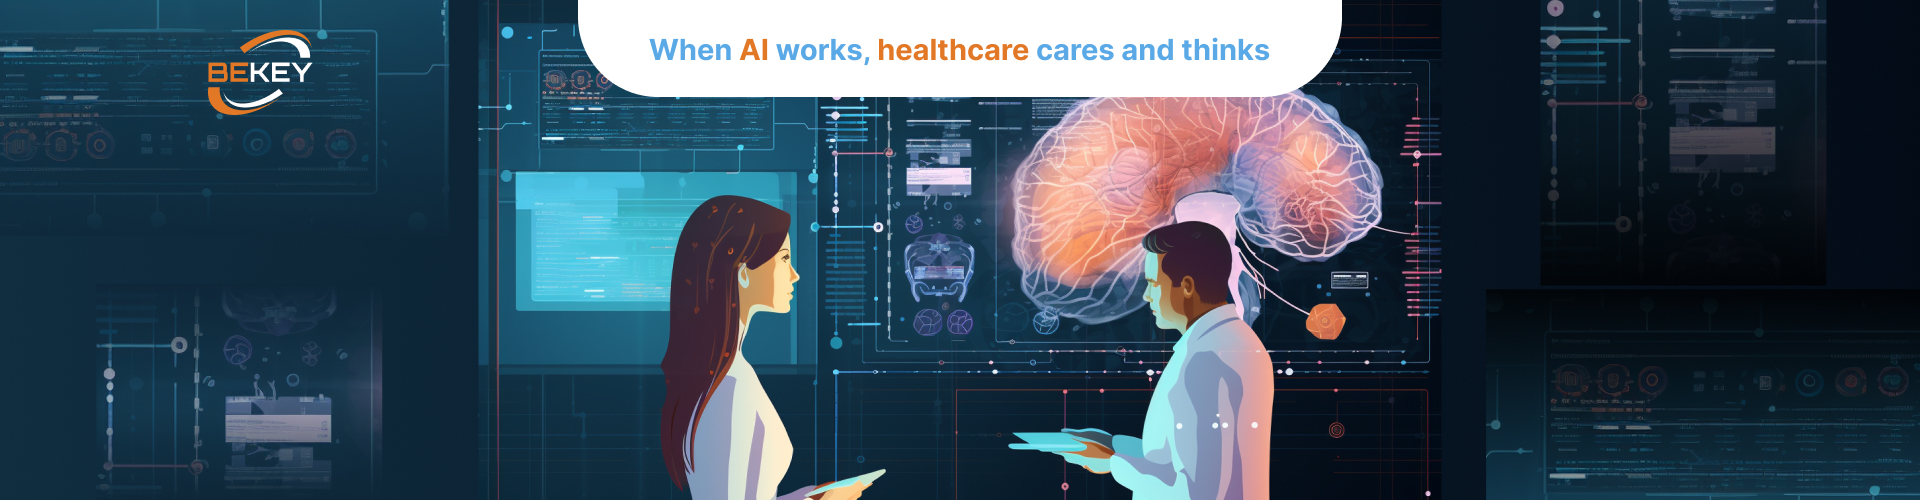 When AI works, healthcare cares and thinks 